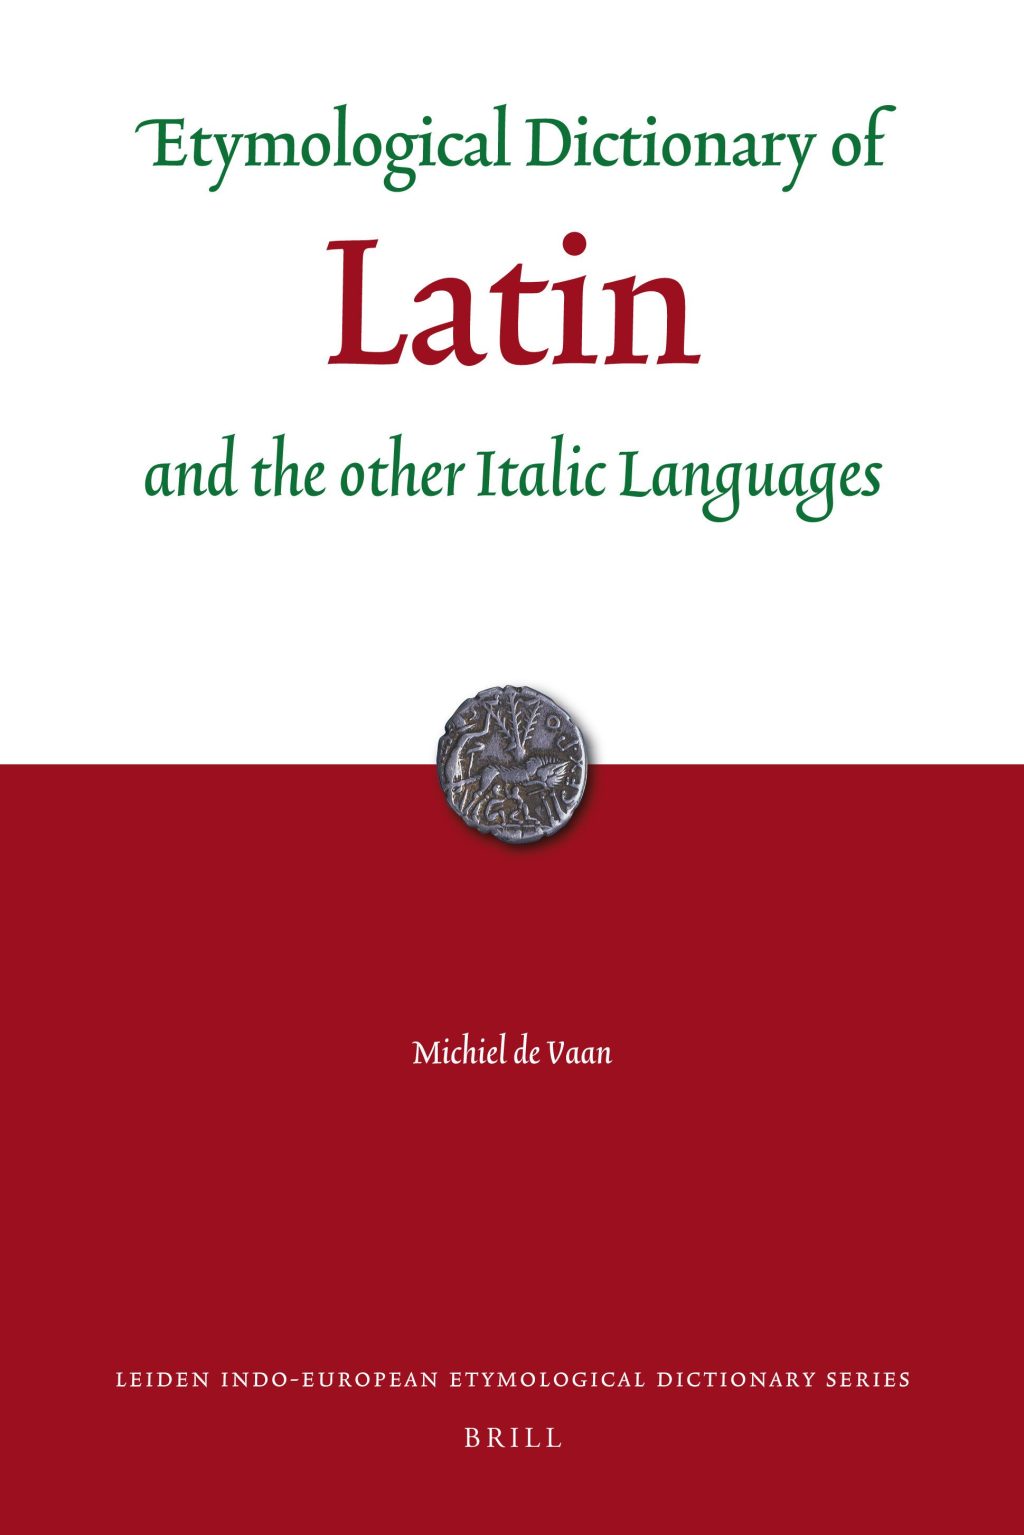 Latin Makes a Comeback: The Resurgence of a “Dead Language” in Education